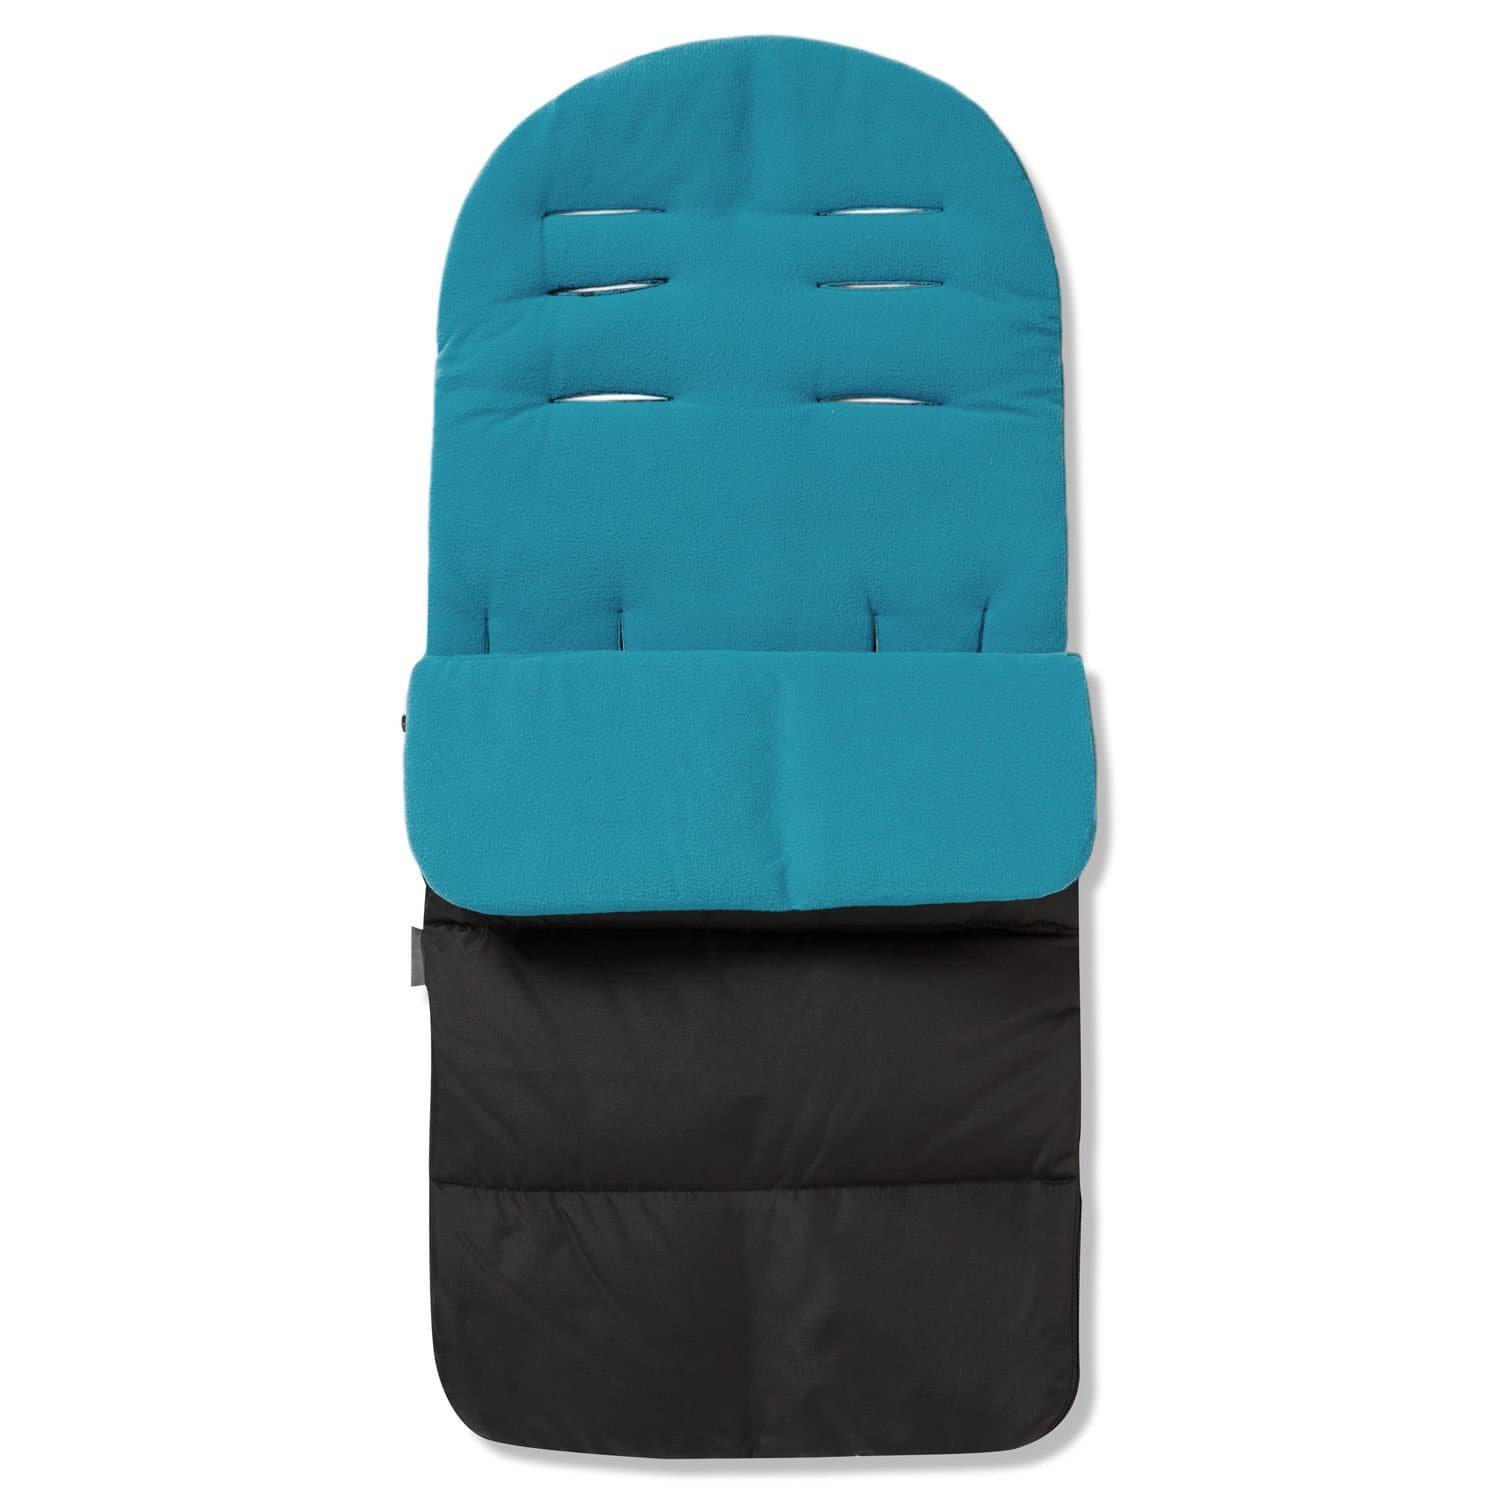 Premium Footmuff / Cosy Toes Compatible with Mee-Go - Ocean Blue / Fits All Models | For Your Little One